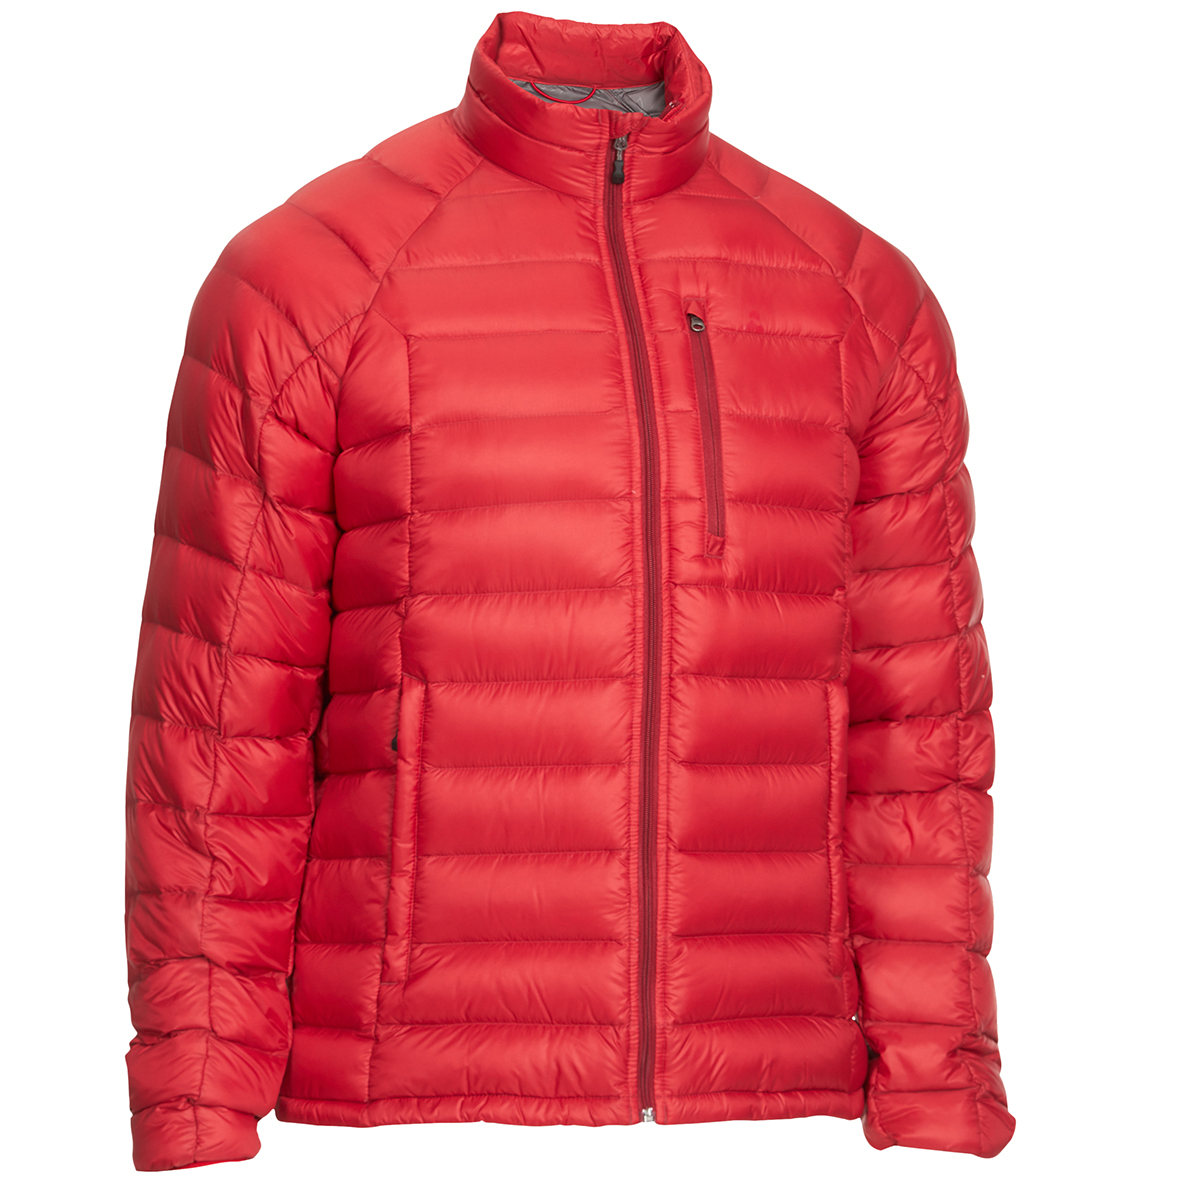 Ems Men's Feather Pack Jacket - Red, XXL